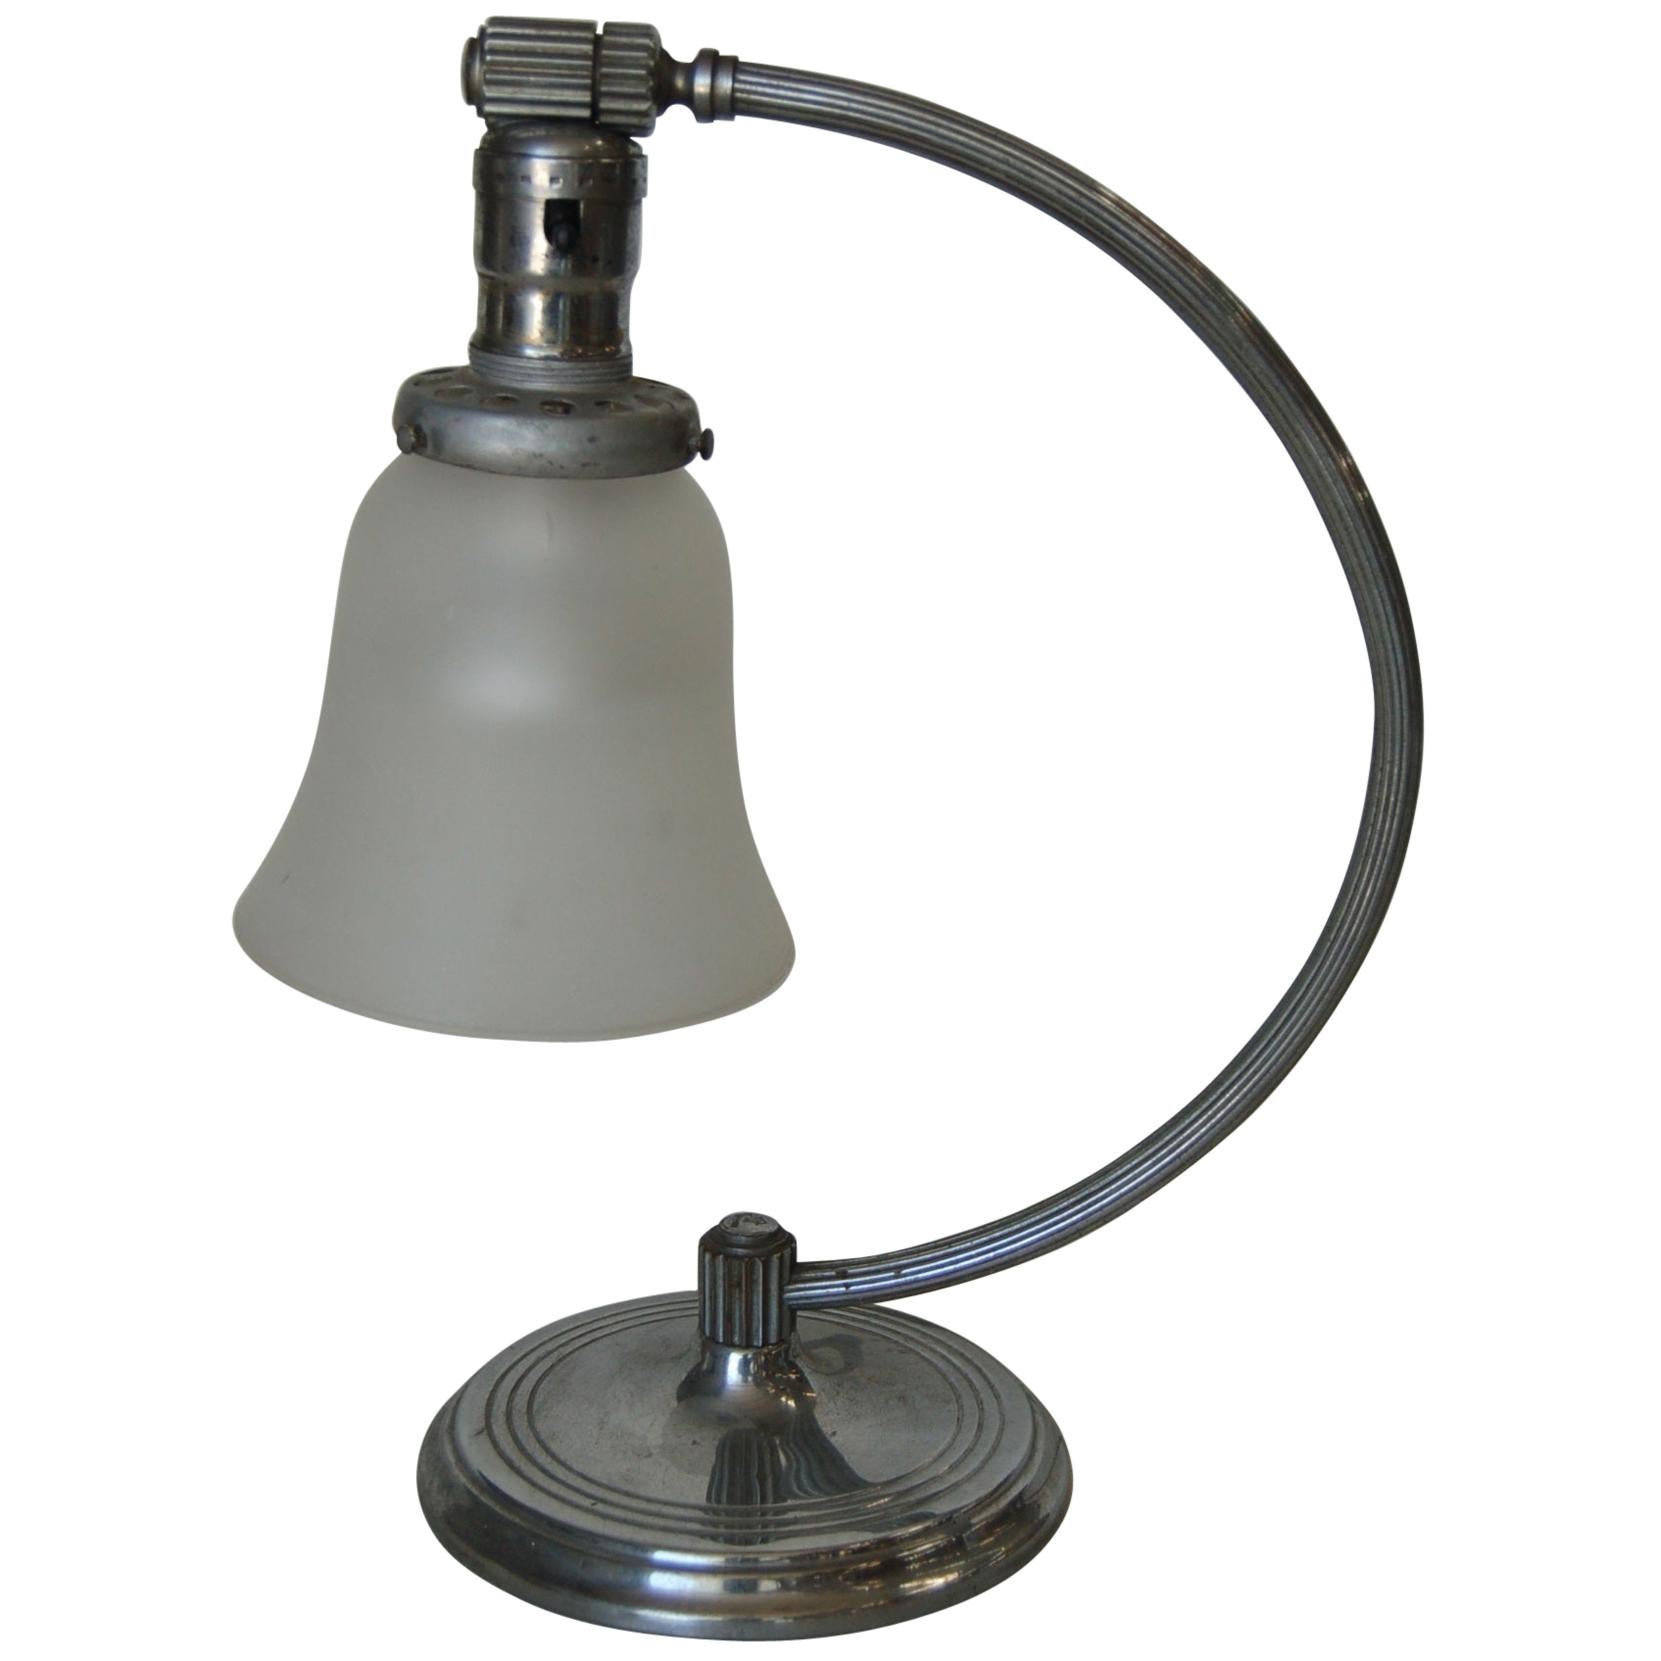 Nickel-Plated Accent Table Lamp with Frosted Bell Lamp Shade